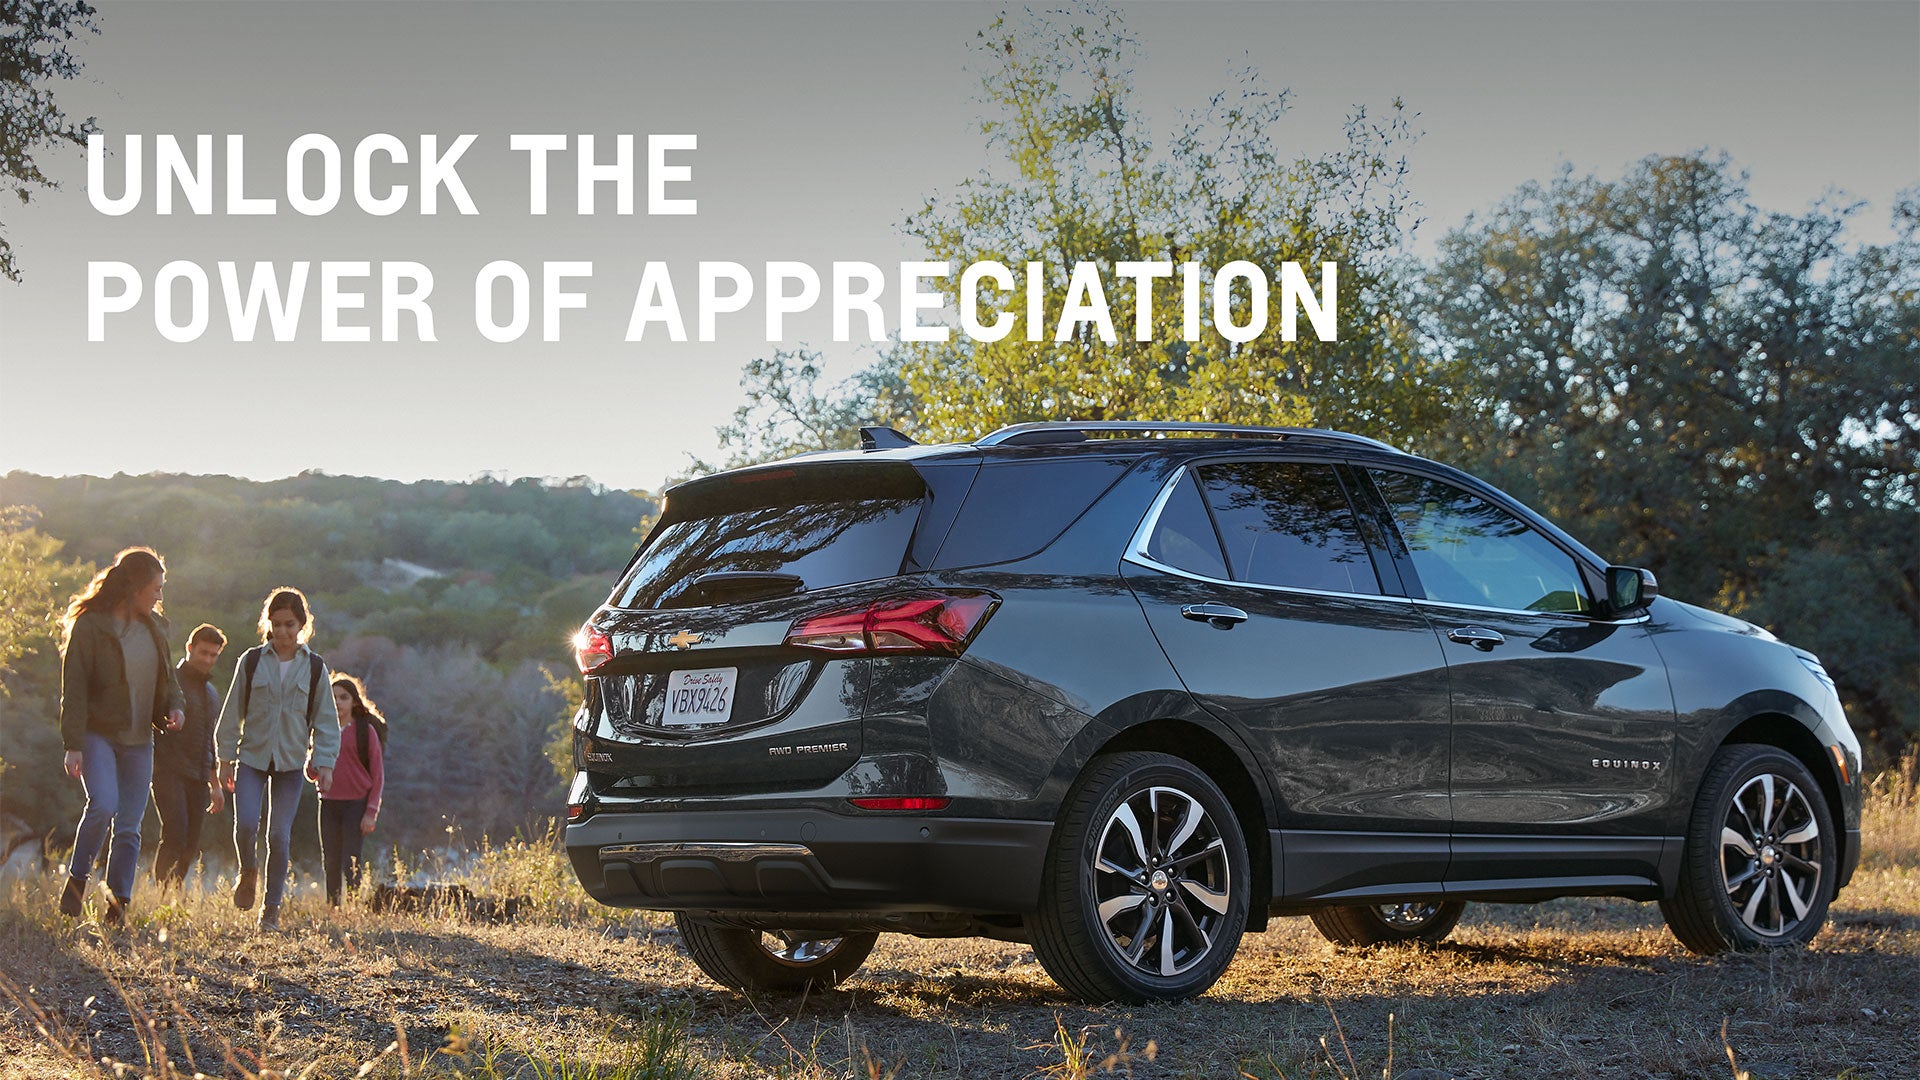 Unlock the power of appreciation | Orr Chevrolet of Fort Smith in Fort Smith AR